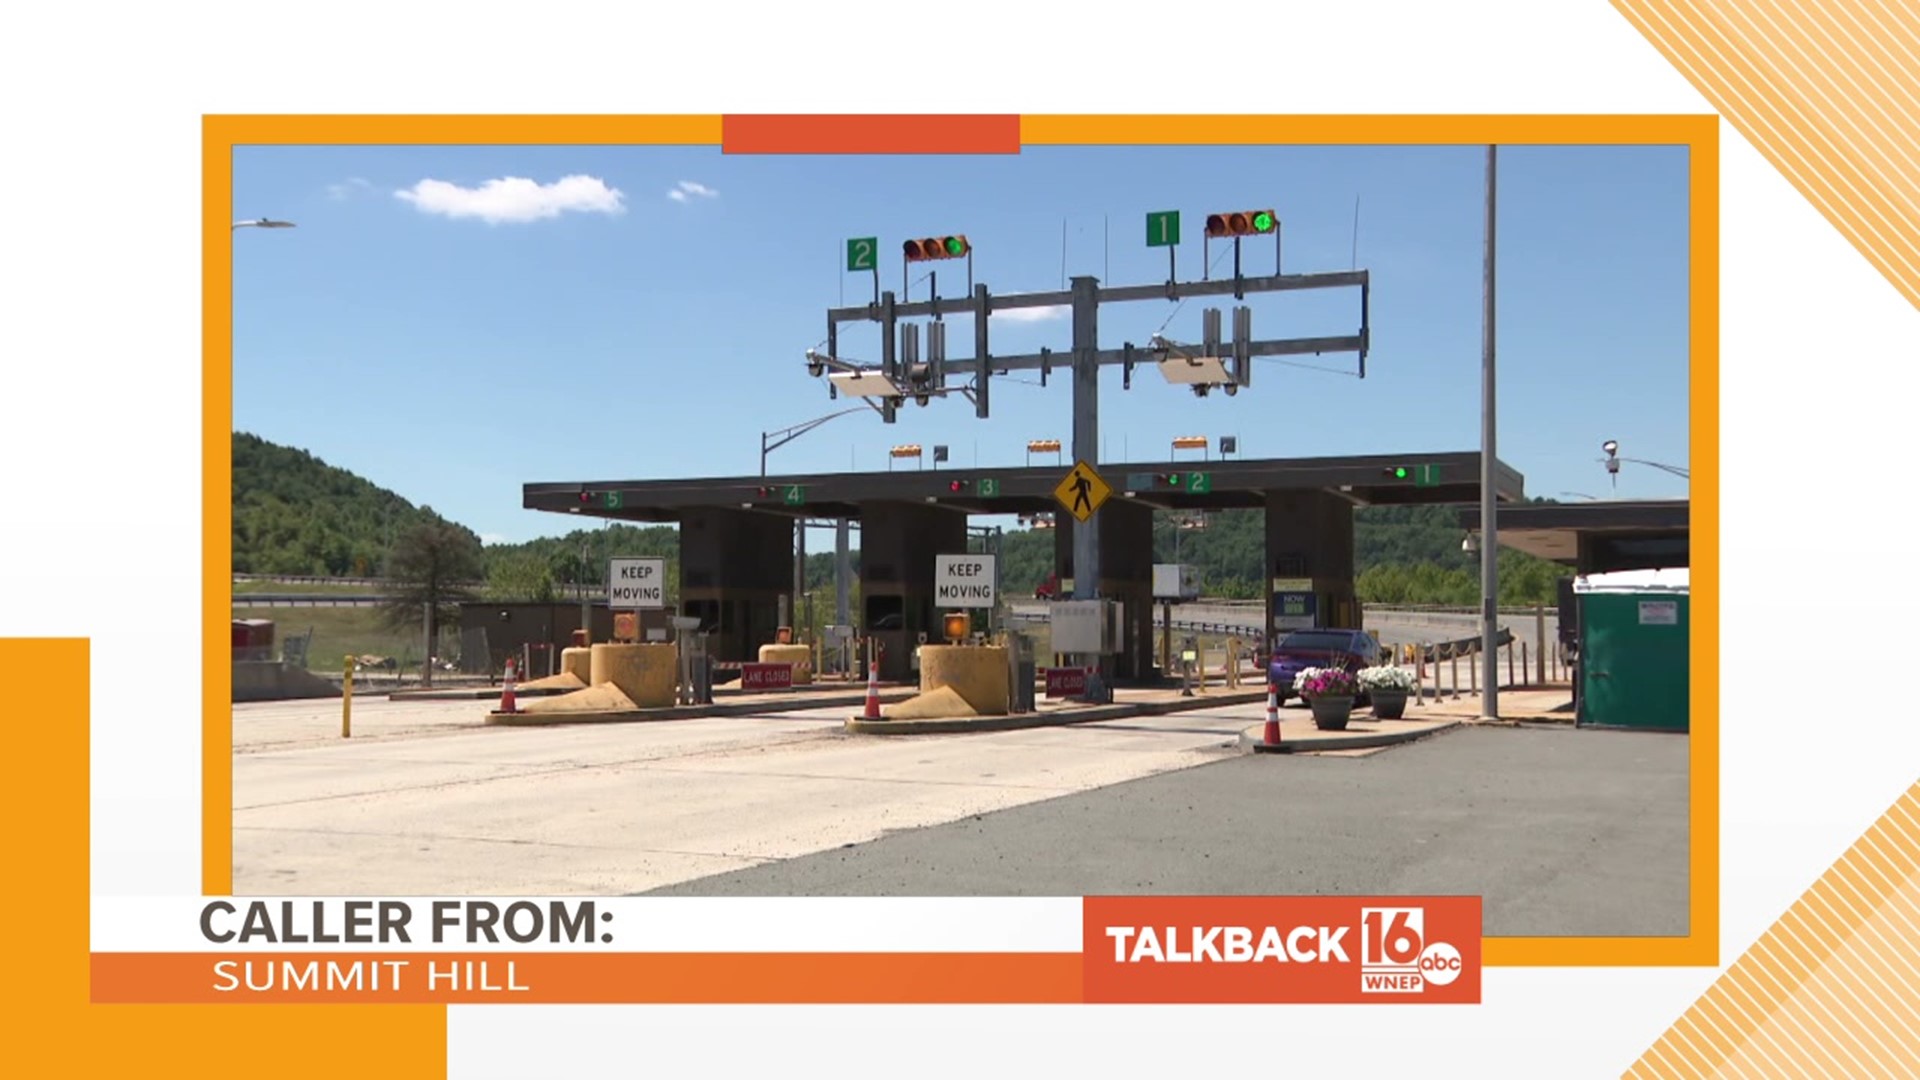 Three callers are not happy that tolls on the PA Turnpike are increasing again.